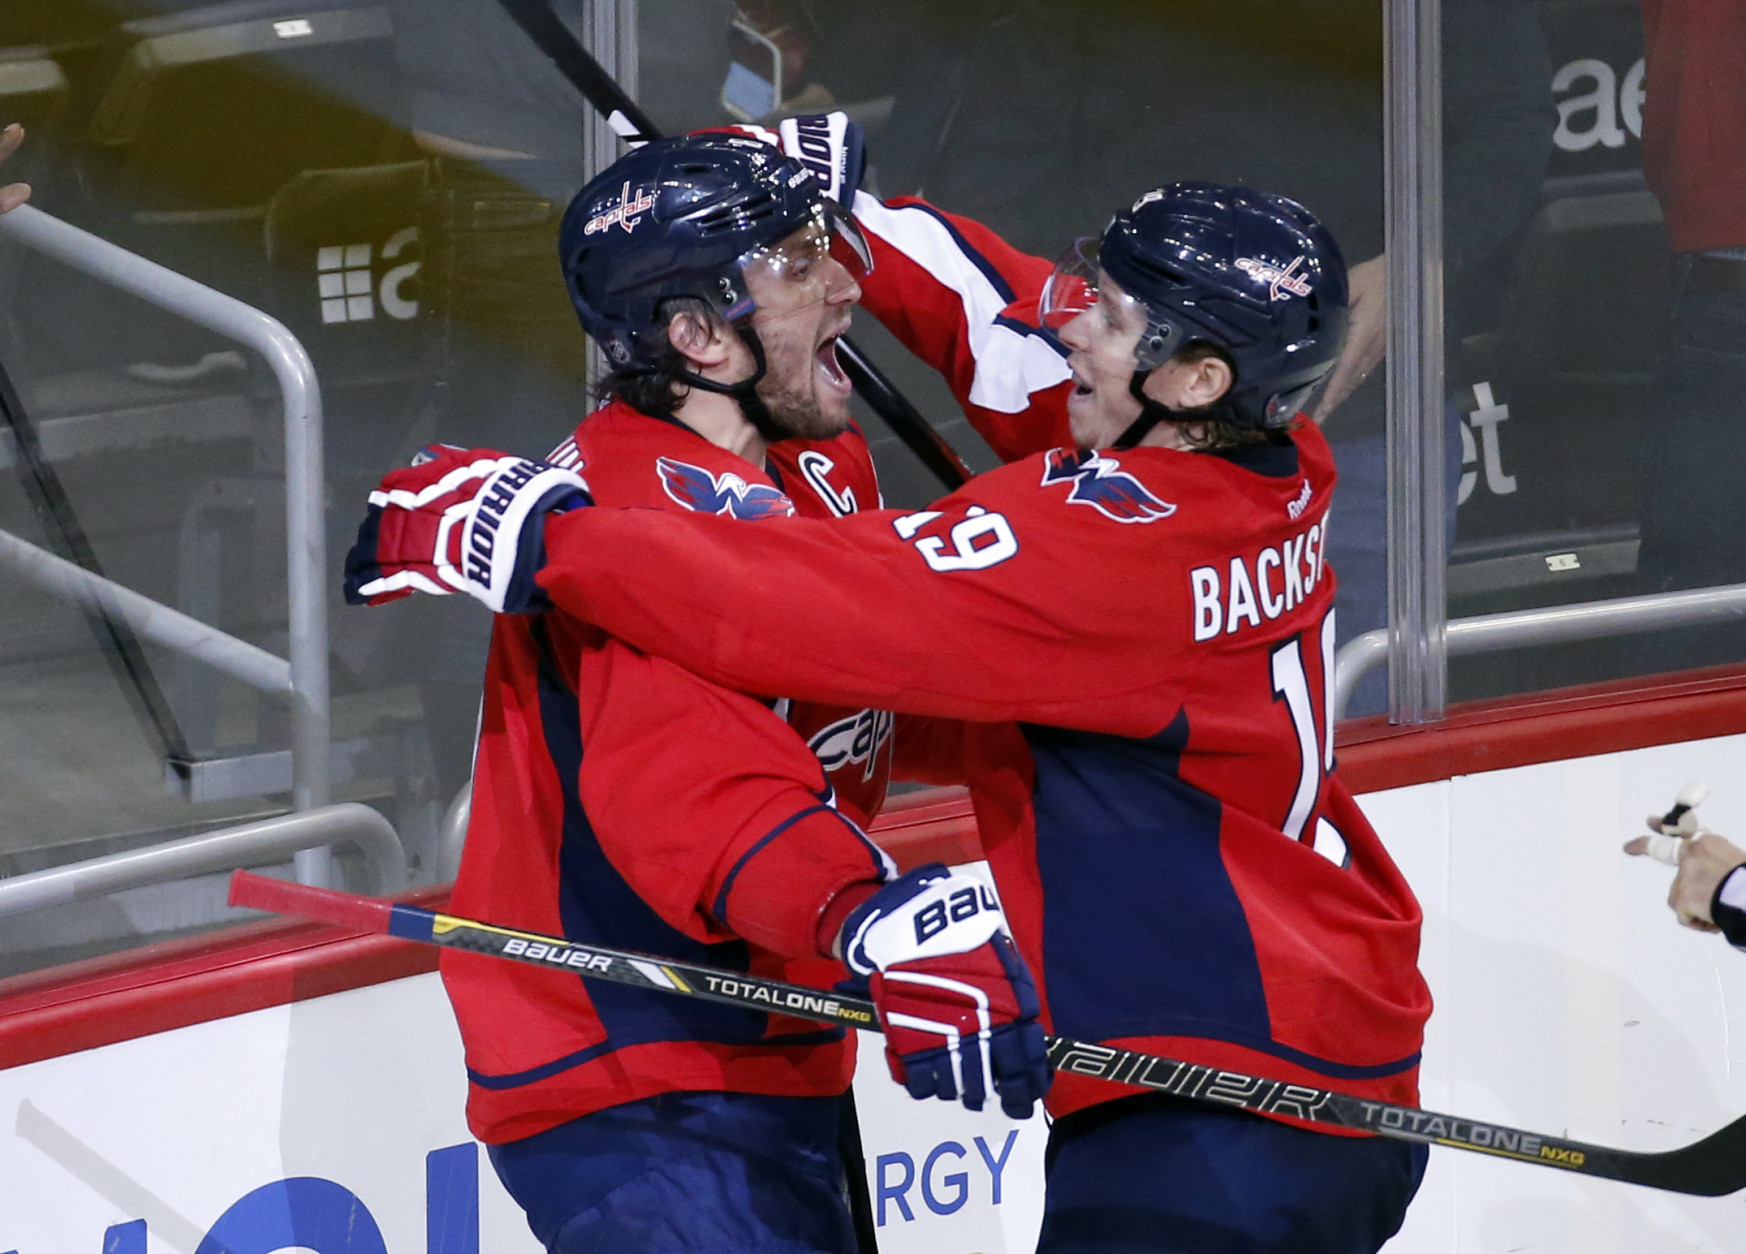 Washington Capitals left wing Alex Ovechkin, left, from Russia, celebrates his goal with center Nicklas Backstrom (19), from Sweden, during the third period of an NHL hockey game against the Dallas Stars, Thursday, Nov. 19, 2015, in Washington. Ovechkin scored his 484th career NHL goal, breaking Sergei Fedorov's record for most by a Russian-born player. The Stars won 3-2. (AP Photo/Alex Brandon)